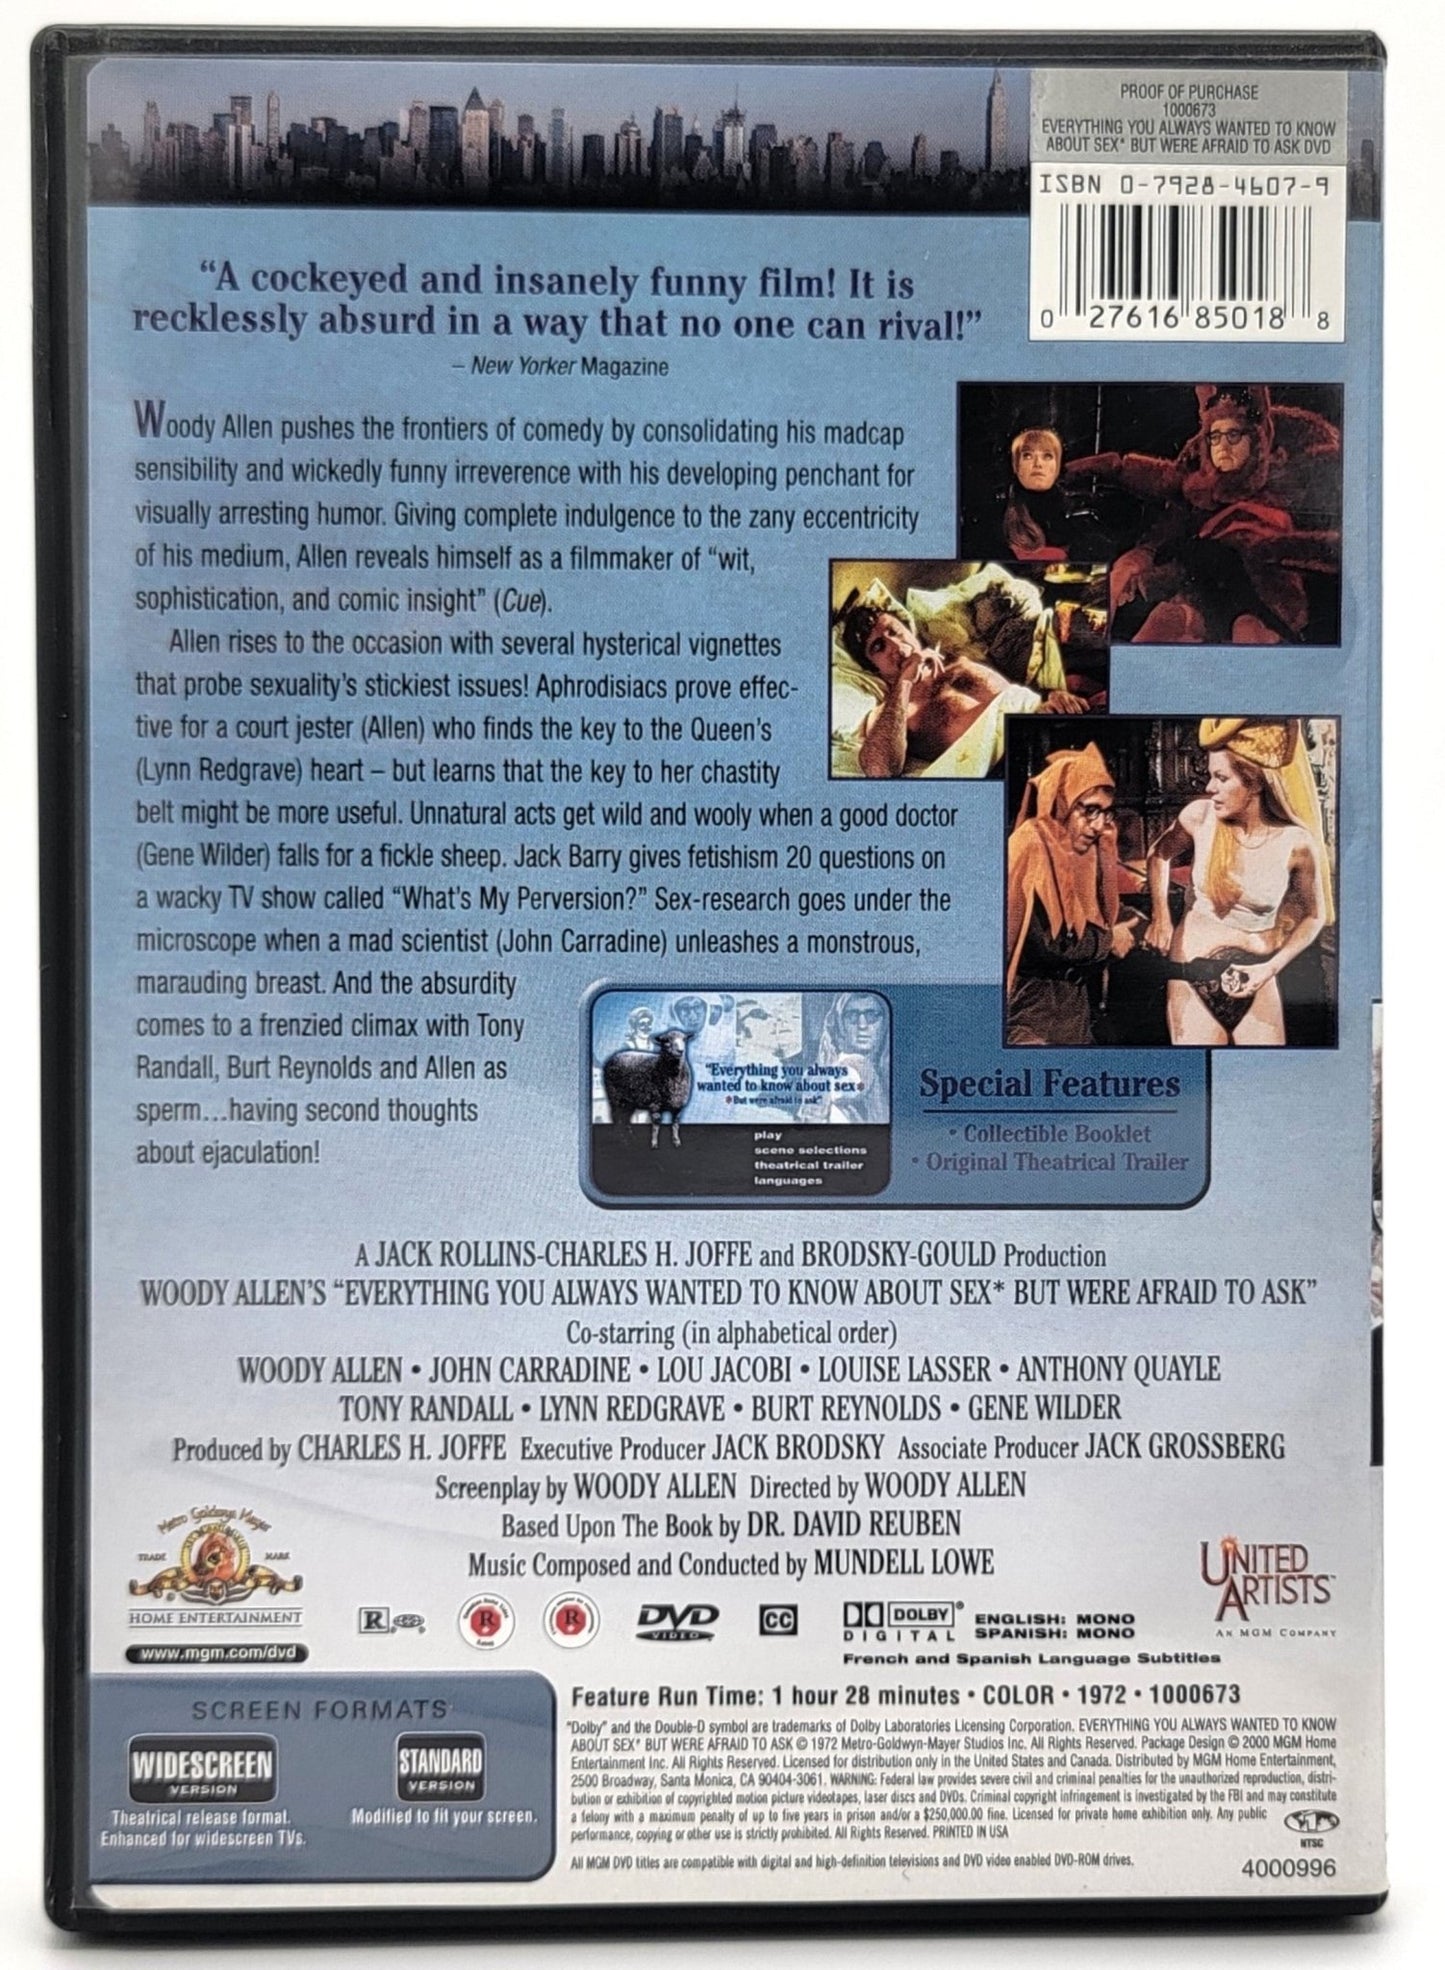 MGM - Everything you always wanted to know about sex but were afraid to ask | Woody Allen | DVD | Widescreen & Standard Version - DVD - Steady Bunny Shop